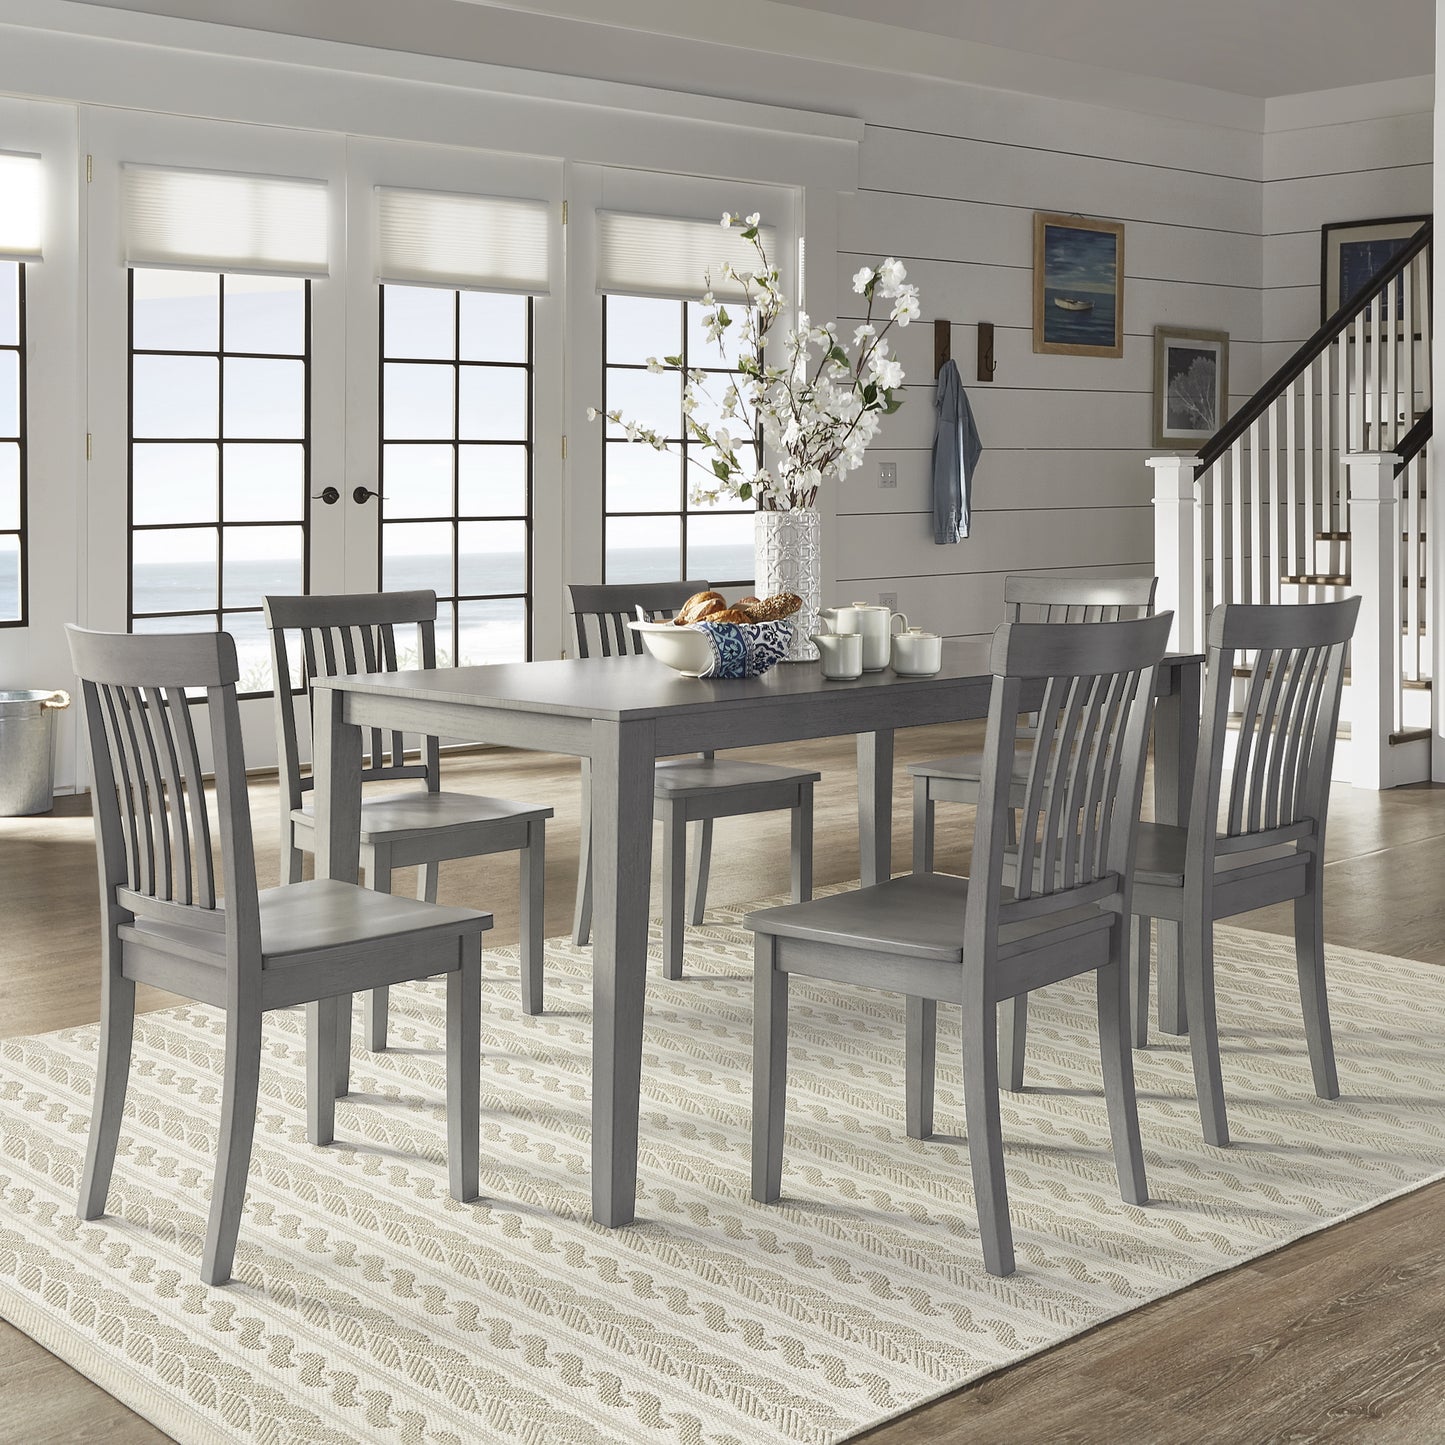 60-inch Rectangular Antique Grey Dining Set - Mission Back Chairs, 7-Piece Set